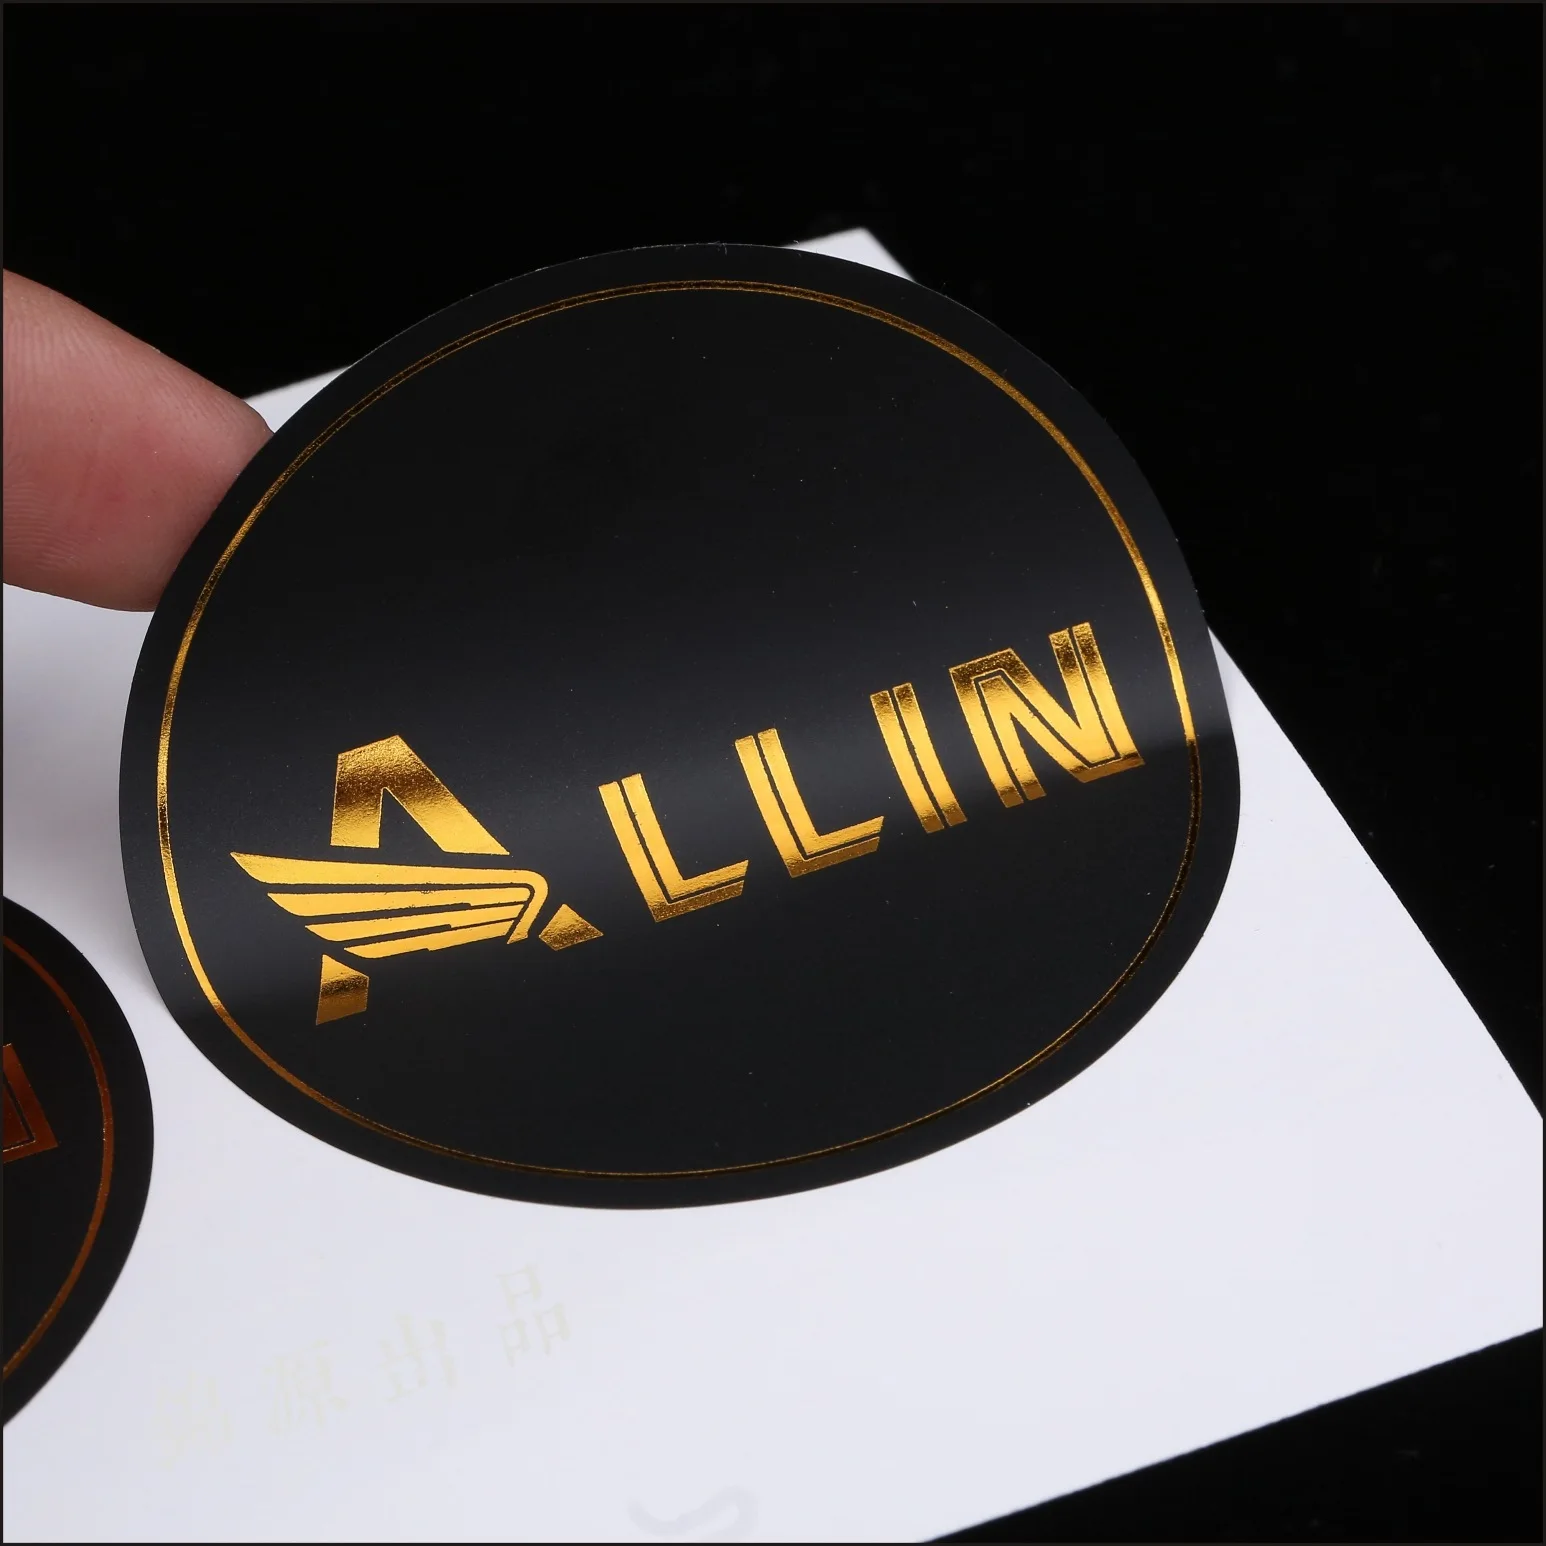 Custom Round Clear Self-Adhesive Paper Stickers Labels Transparent Gold Foil Logo Thank You Sticker